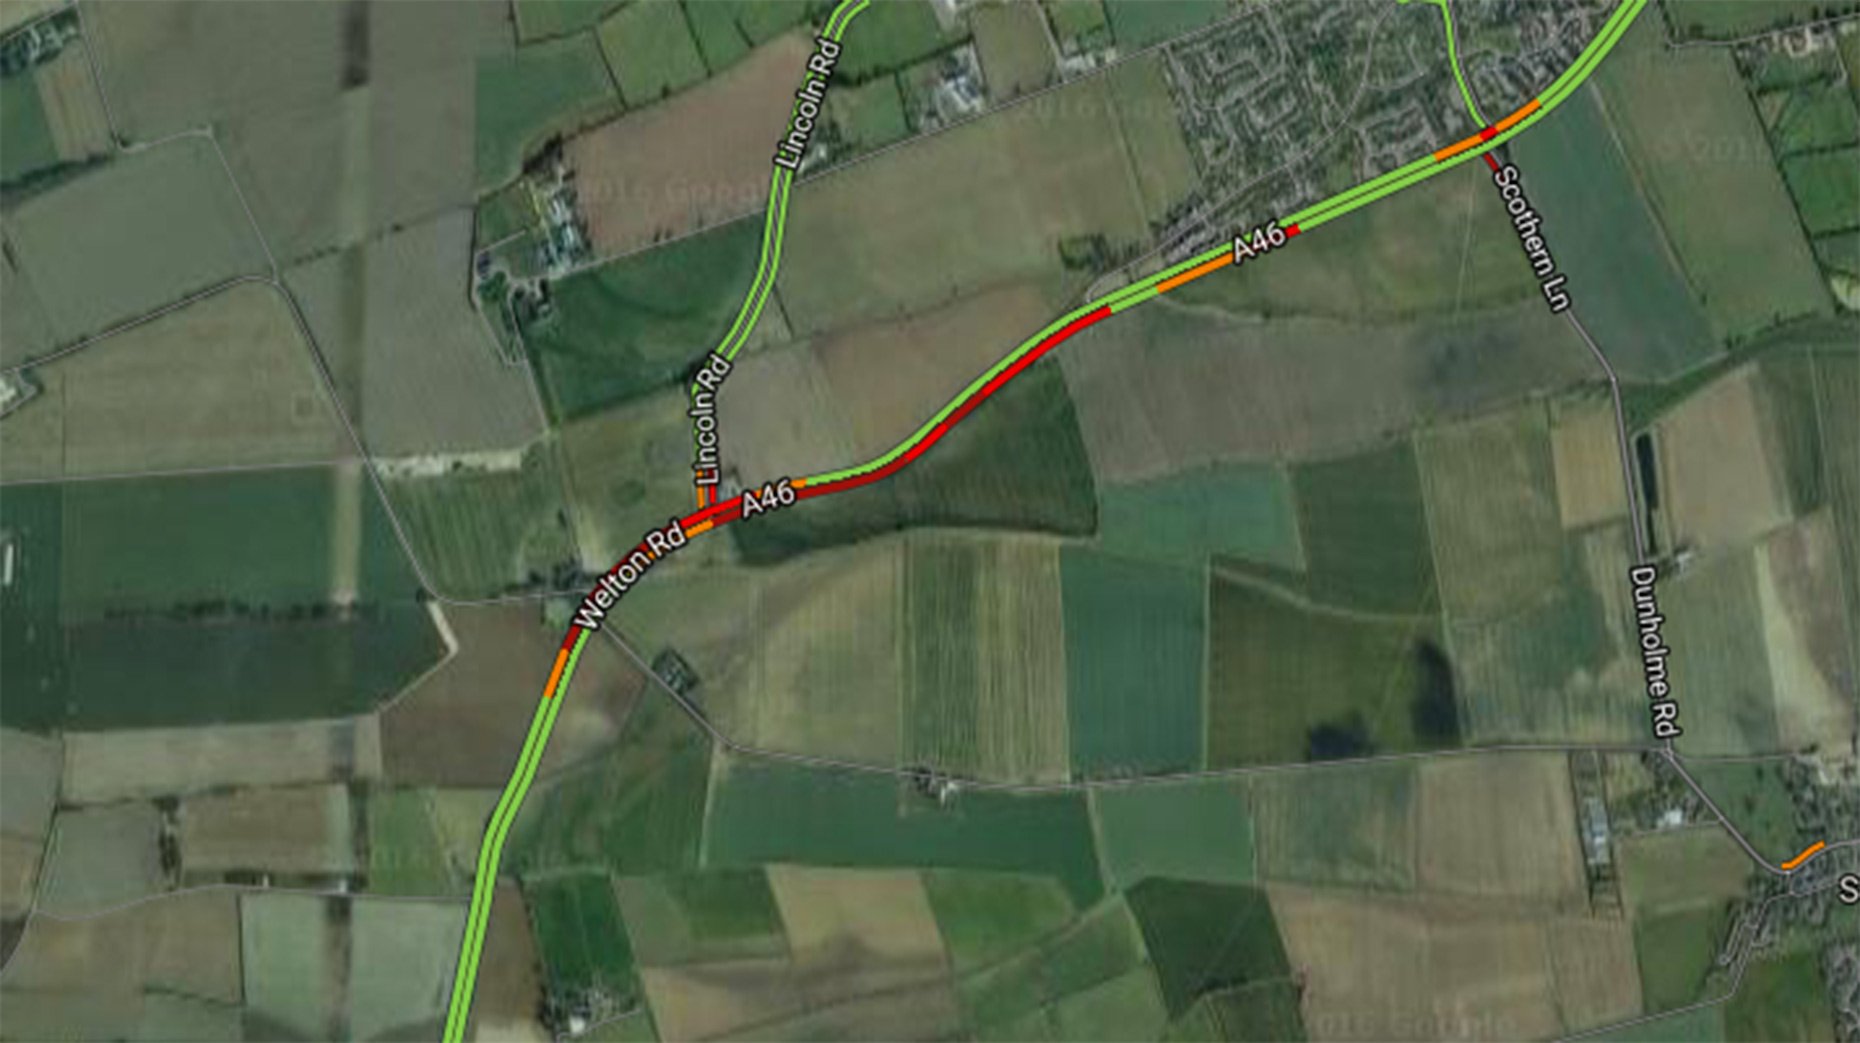 Significant delays on the A46 near Welton. 